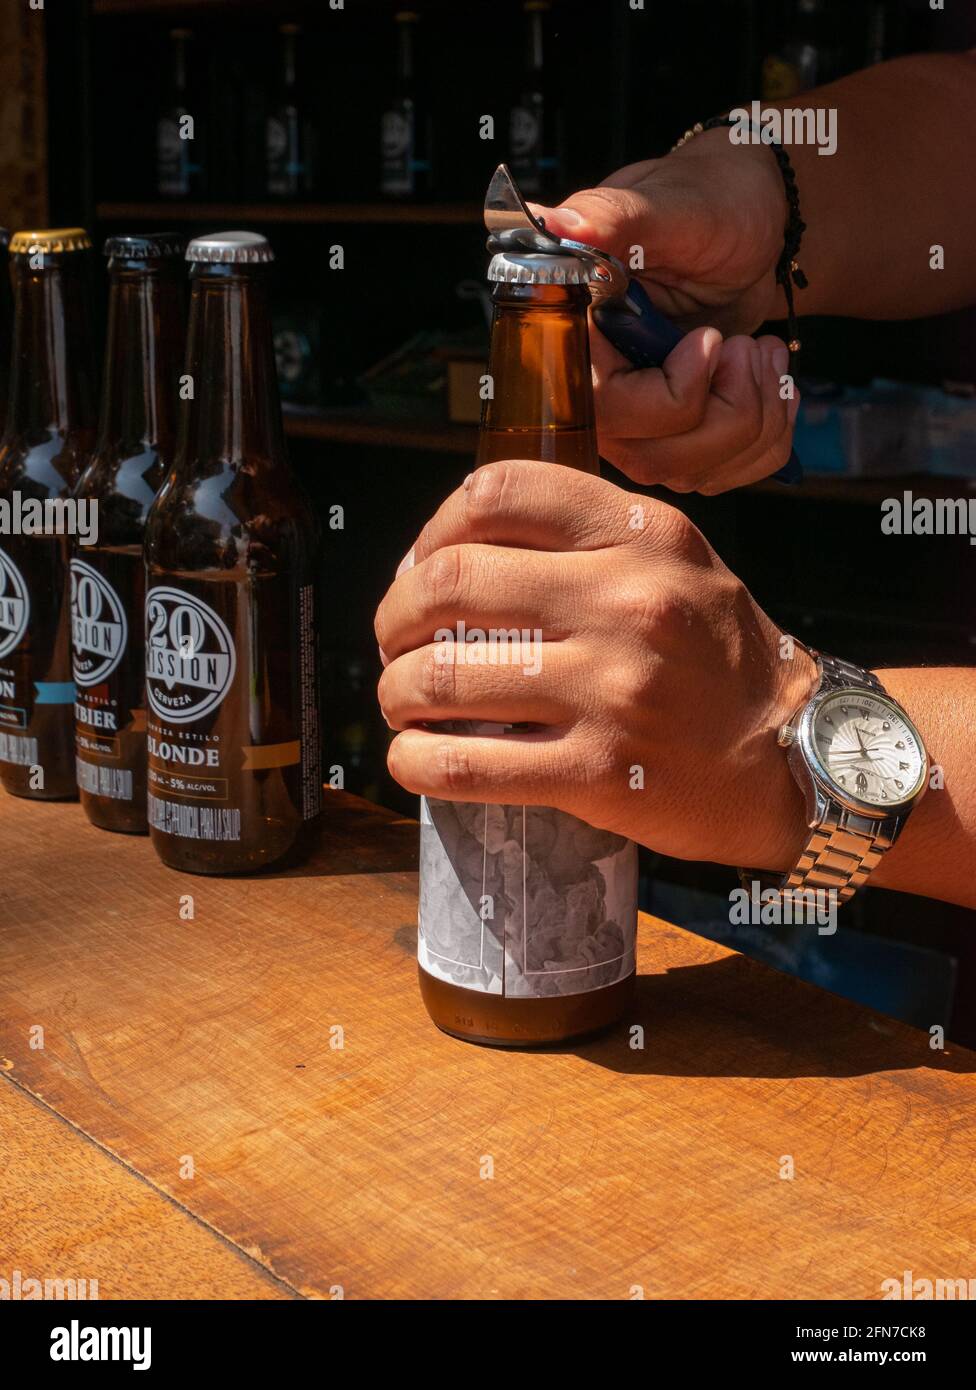 Medellin, Antioquia, Colombia - December 23 2020: Man's Hands opening a Handcraft Beer in a Bar Stock Photo